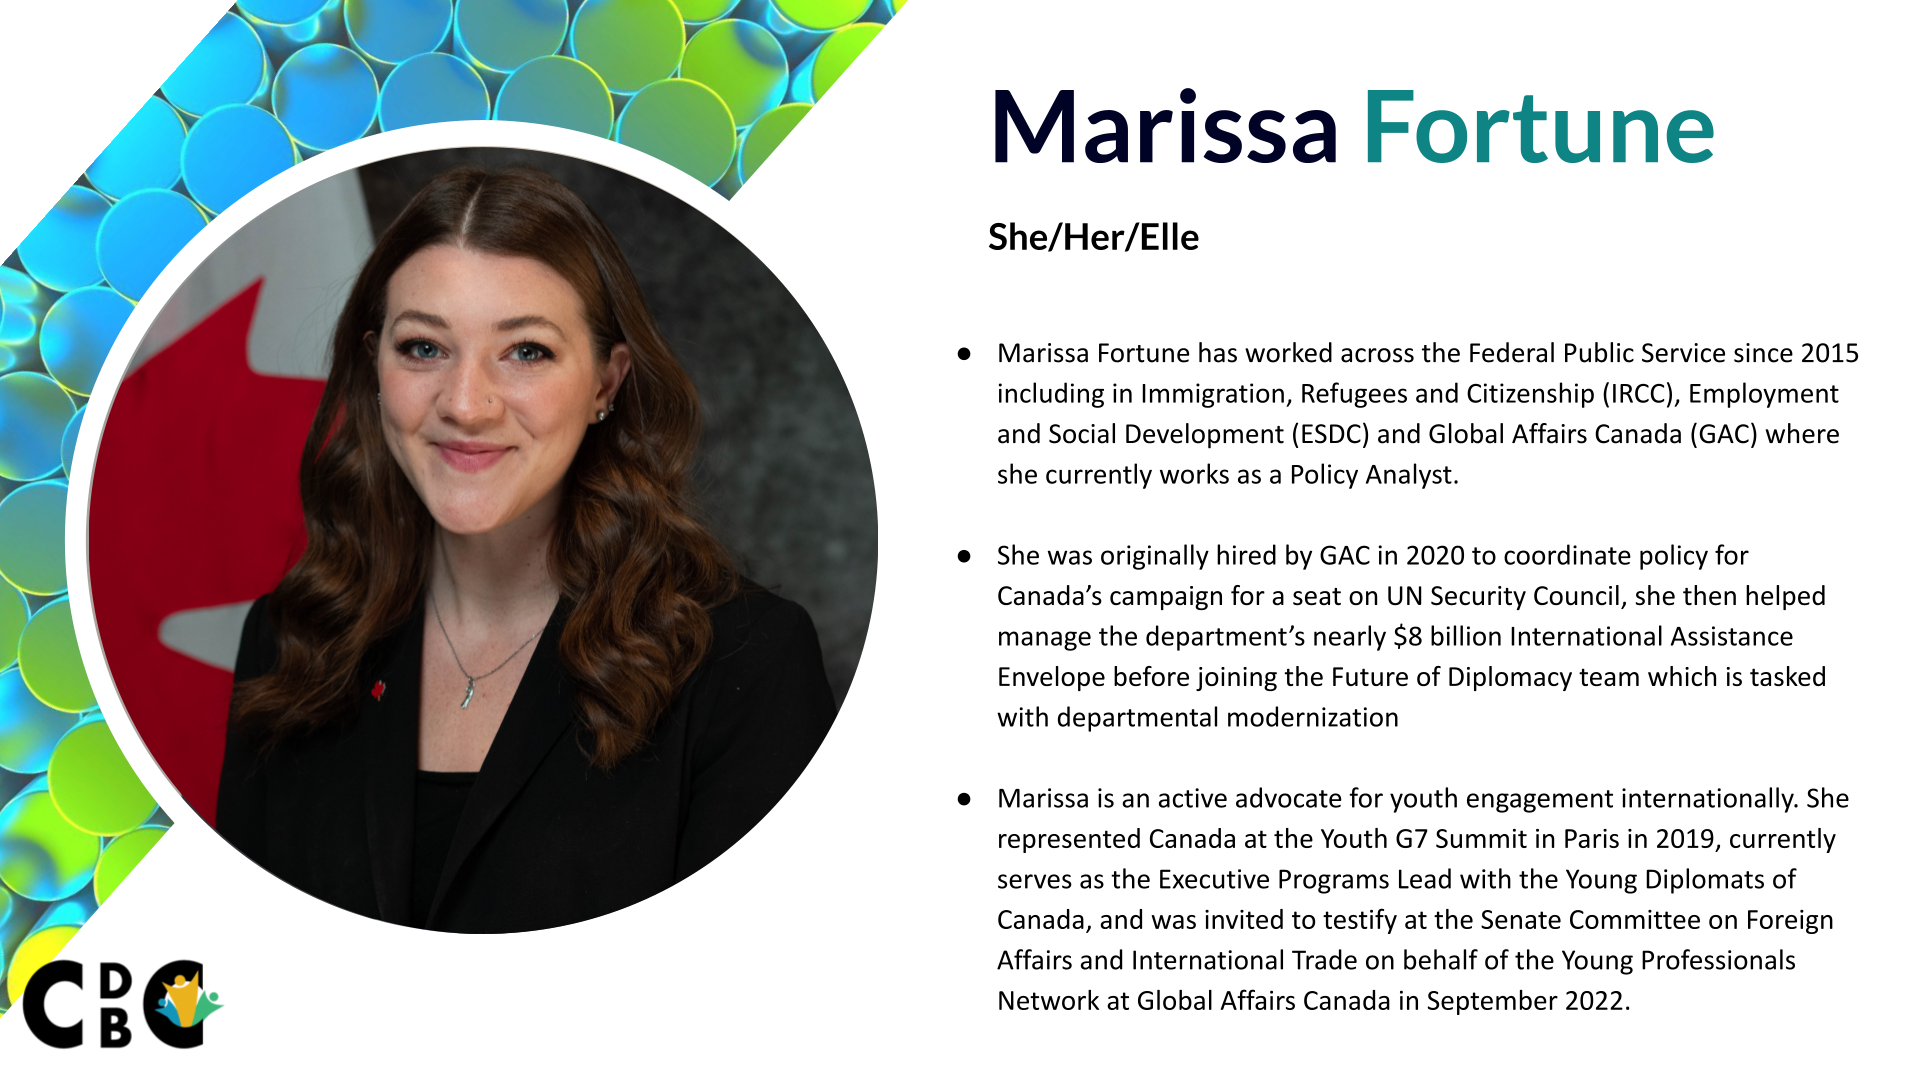 Marissa Fortune - Marissa Fortune has worked across the Federal Public Service since 2015 including in Immigration, Refugees and Citizenship (IRCC), Employment and Social Development (ESDC) and Global Affairs Canada (GAC) where she currently works as a Policy Analyst. She was originally hired by GAC in 2020 to coordinate policy for Canada’s campaign for a seat on UN Security Council, she then helped manage the department’s nearly $8 billion International Assistance Envelope before joining the Future of Diplomacy team which is tasked with departmental modernization Marissa is an active advocate for youth engagement internationally. She represented Canada at the Youth G7 Summit in Paris in 2019, currently serves as the Executive Programs Lead with the Young Diplomats of Canada, and was invited to testify at the Senate Committee on Foreign Affairs and International Trade on behalf of the Young Professionals Network at Global Affairs Canada in September 2022.